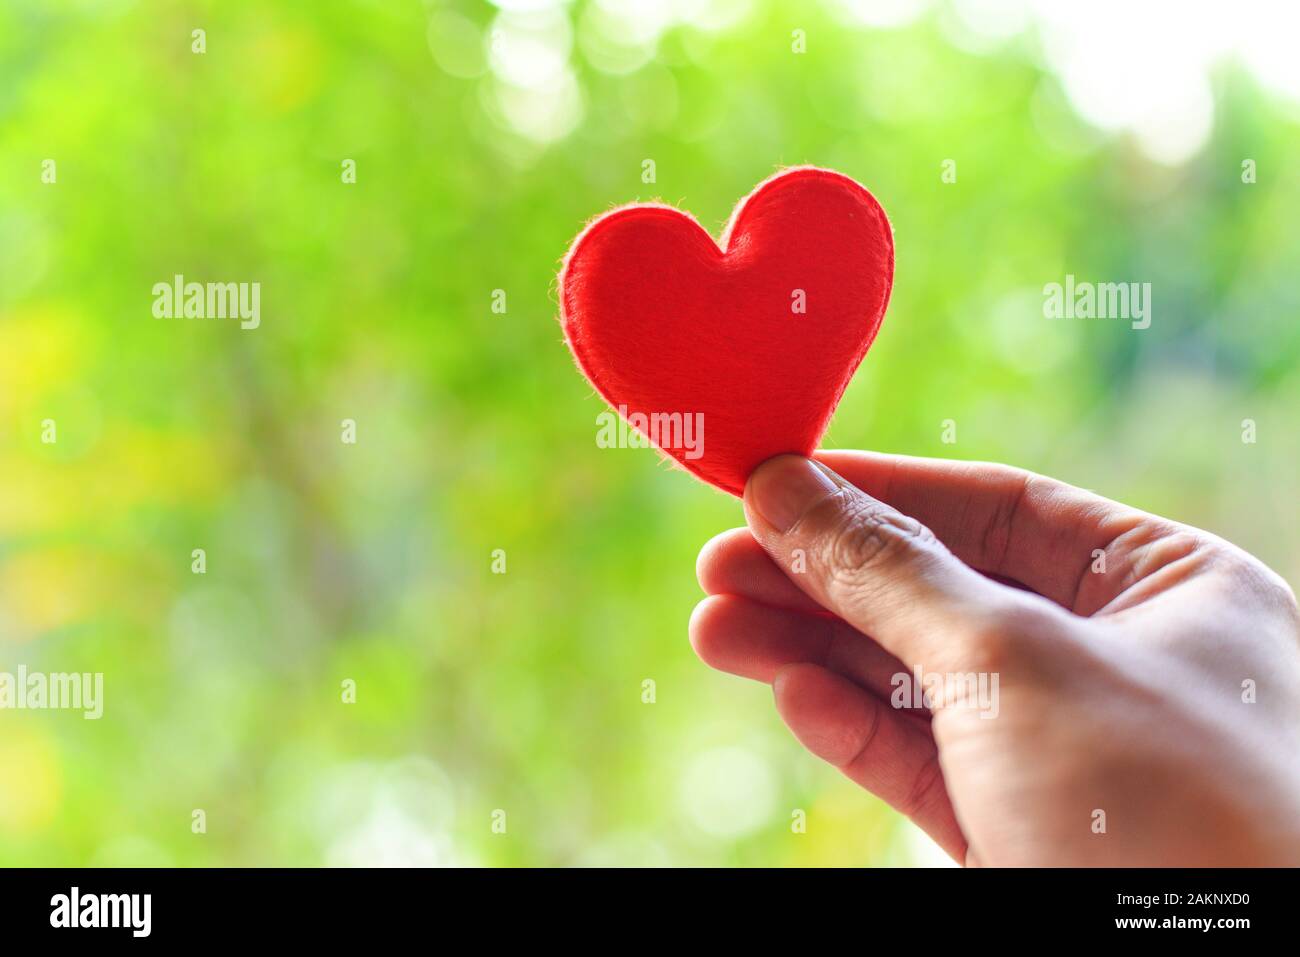 Heart On Hand For Philanthropy Concept Woman Holding Red Heart In Hands For Valentines Day Or Donate Help Give Love Warmth Take Care Stock Photo Alamy